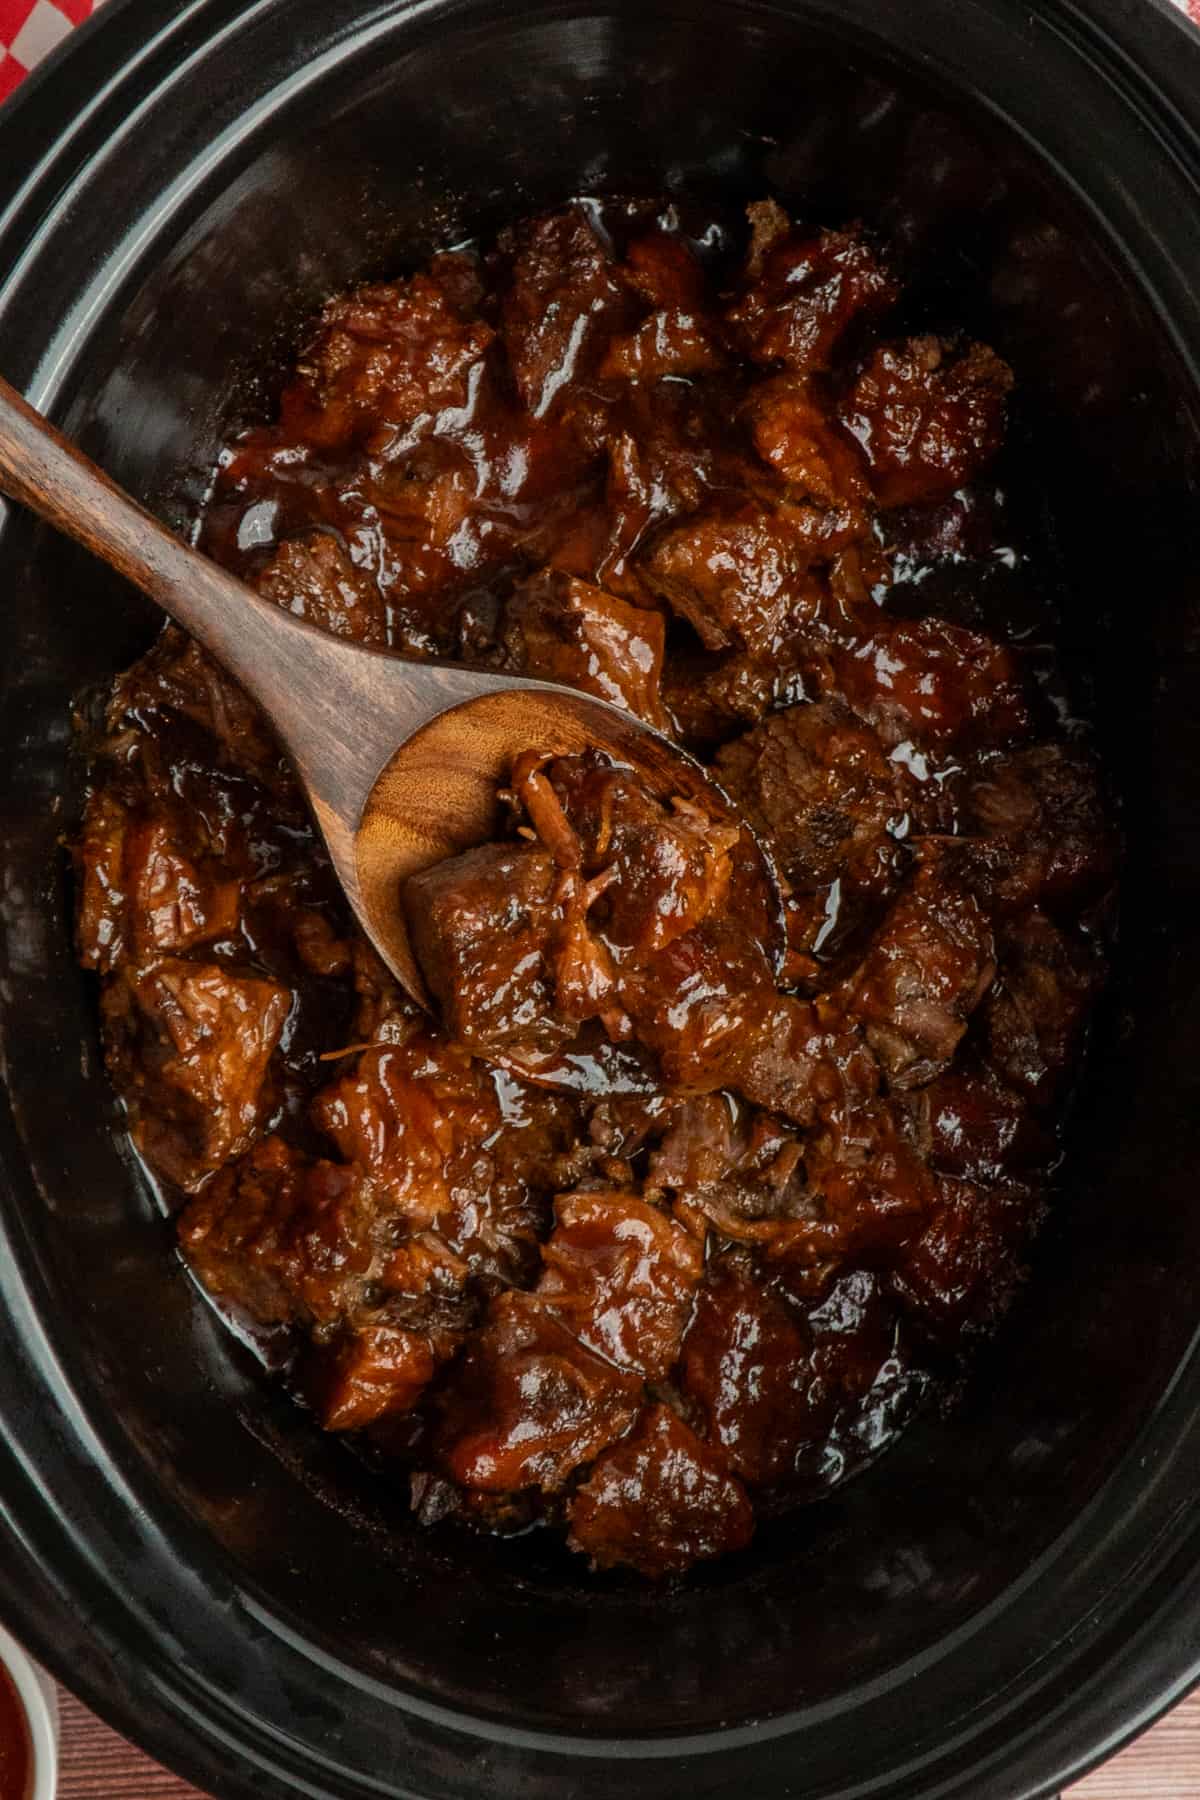 A wooden spoon holding burnt ends over a slow cooker.